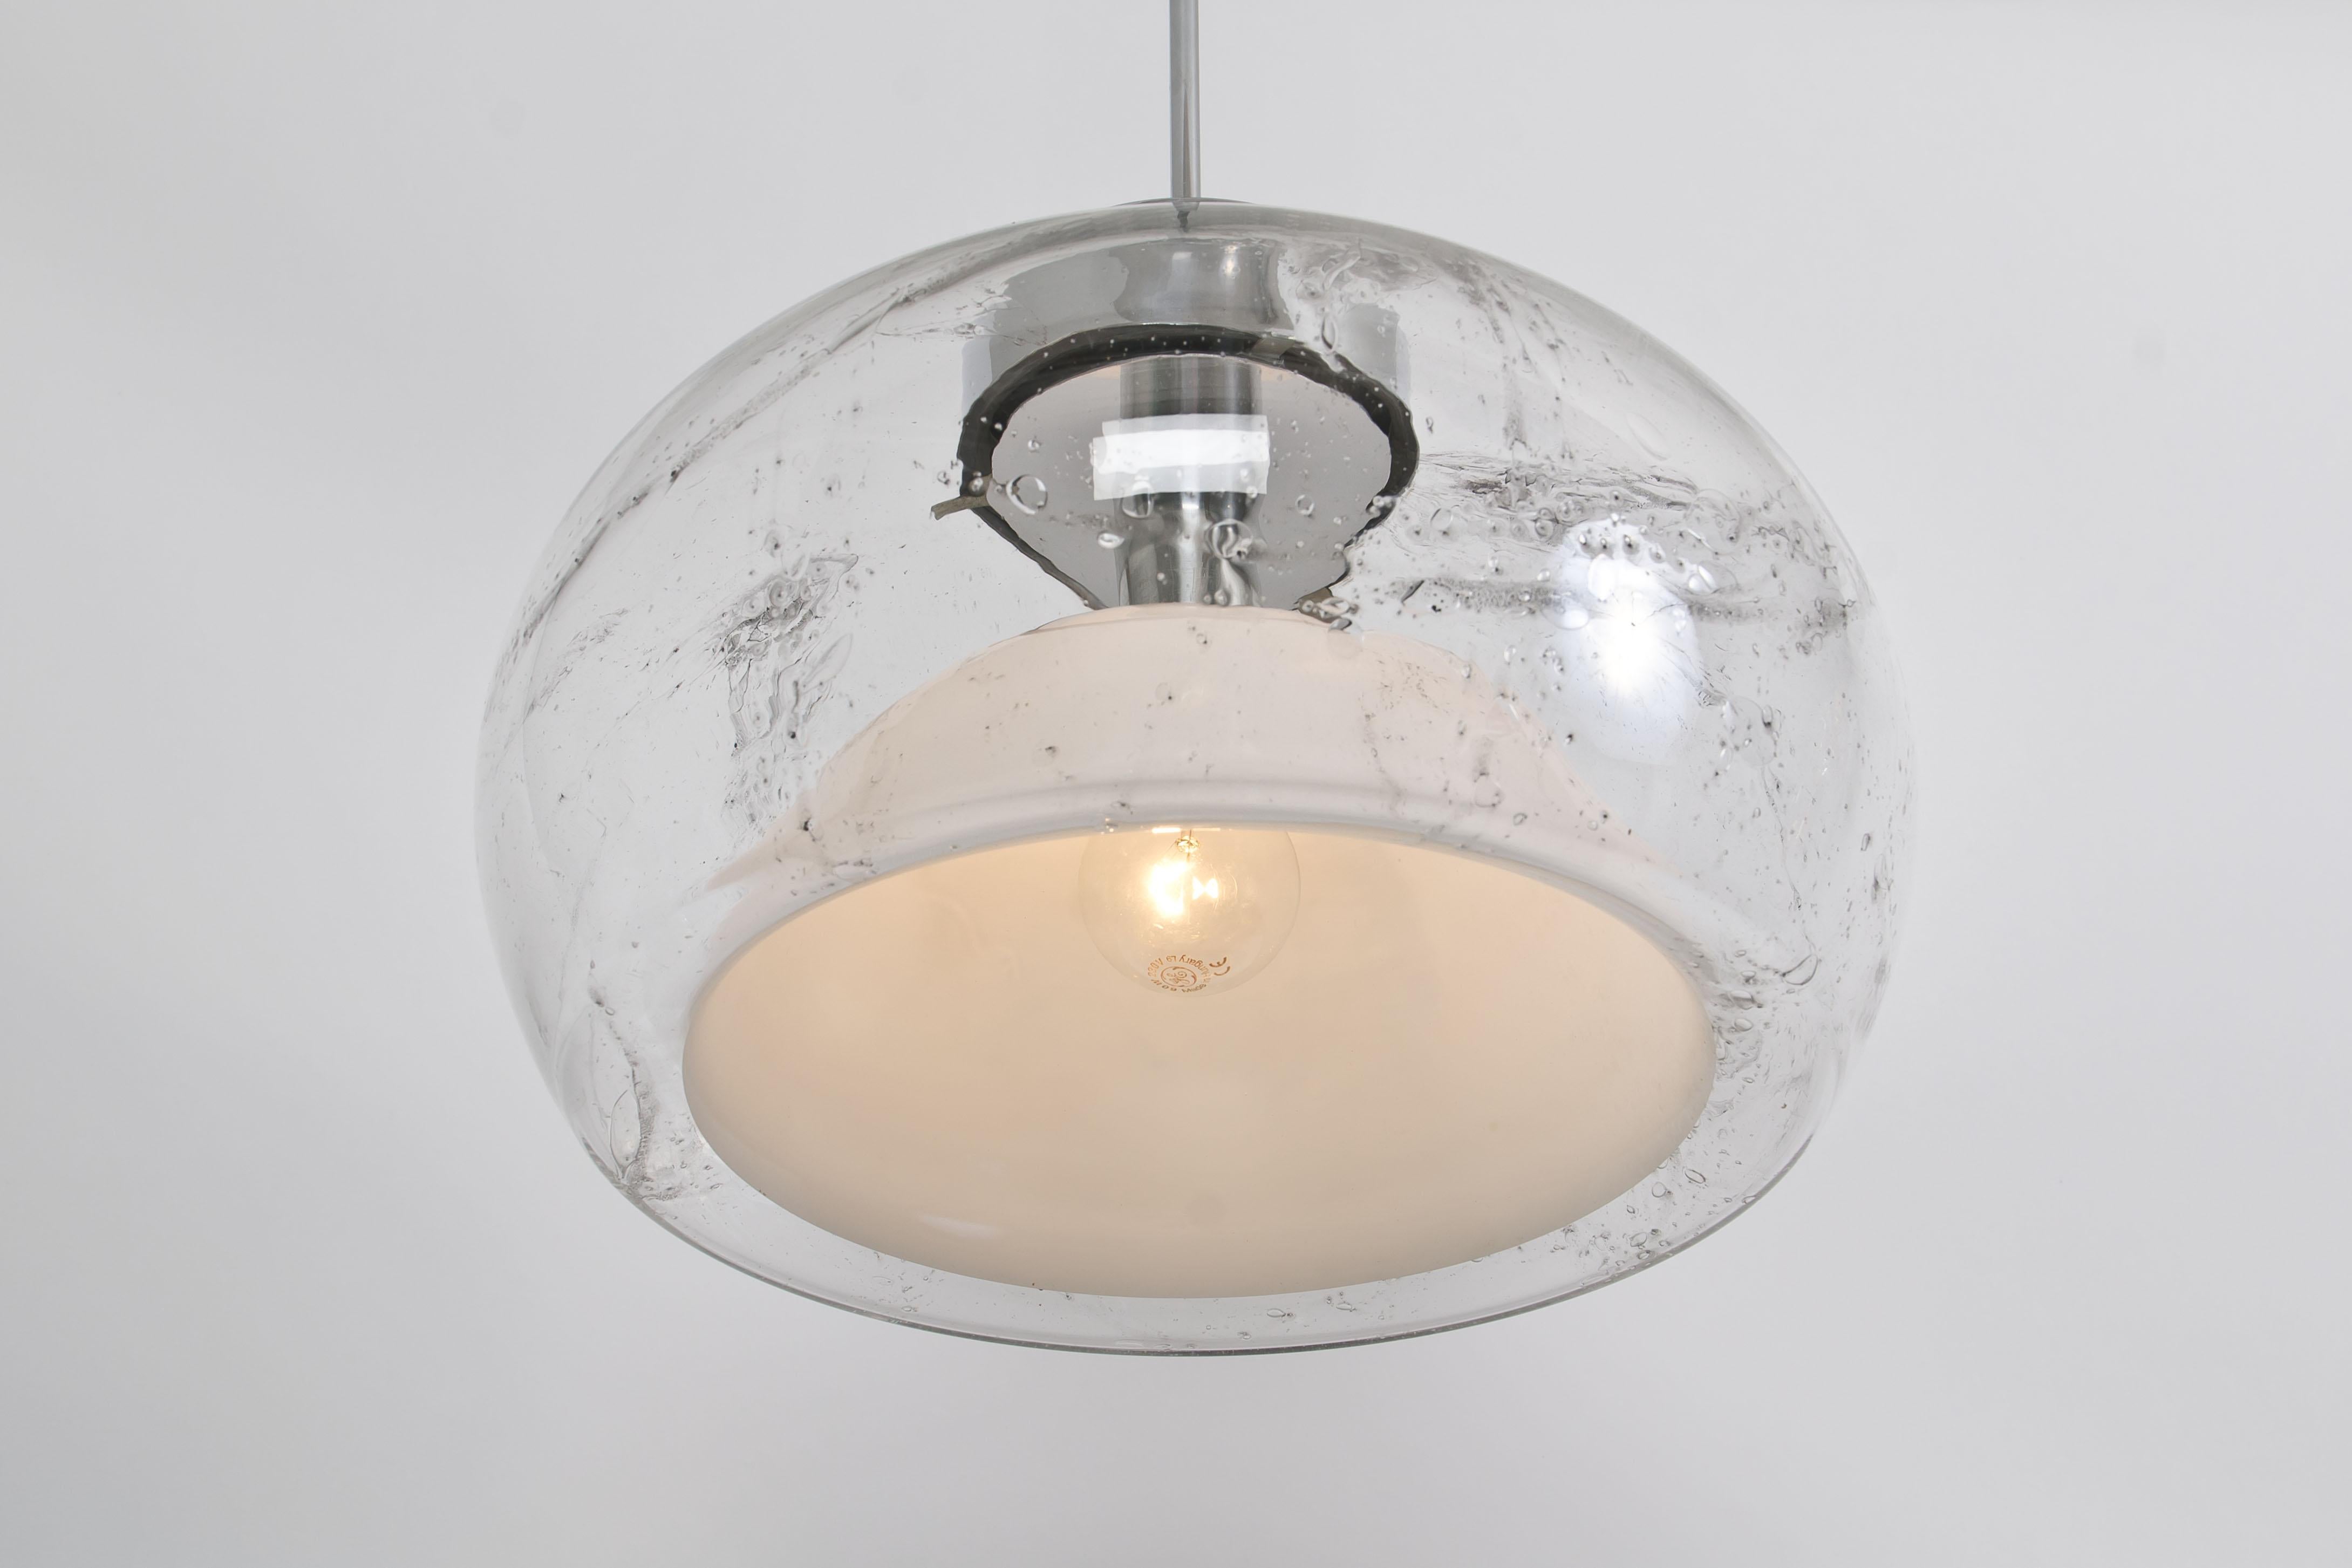 Hand Blown Glass Pedant Light by Doria, Germany, 1970s For Sale 3